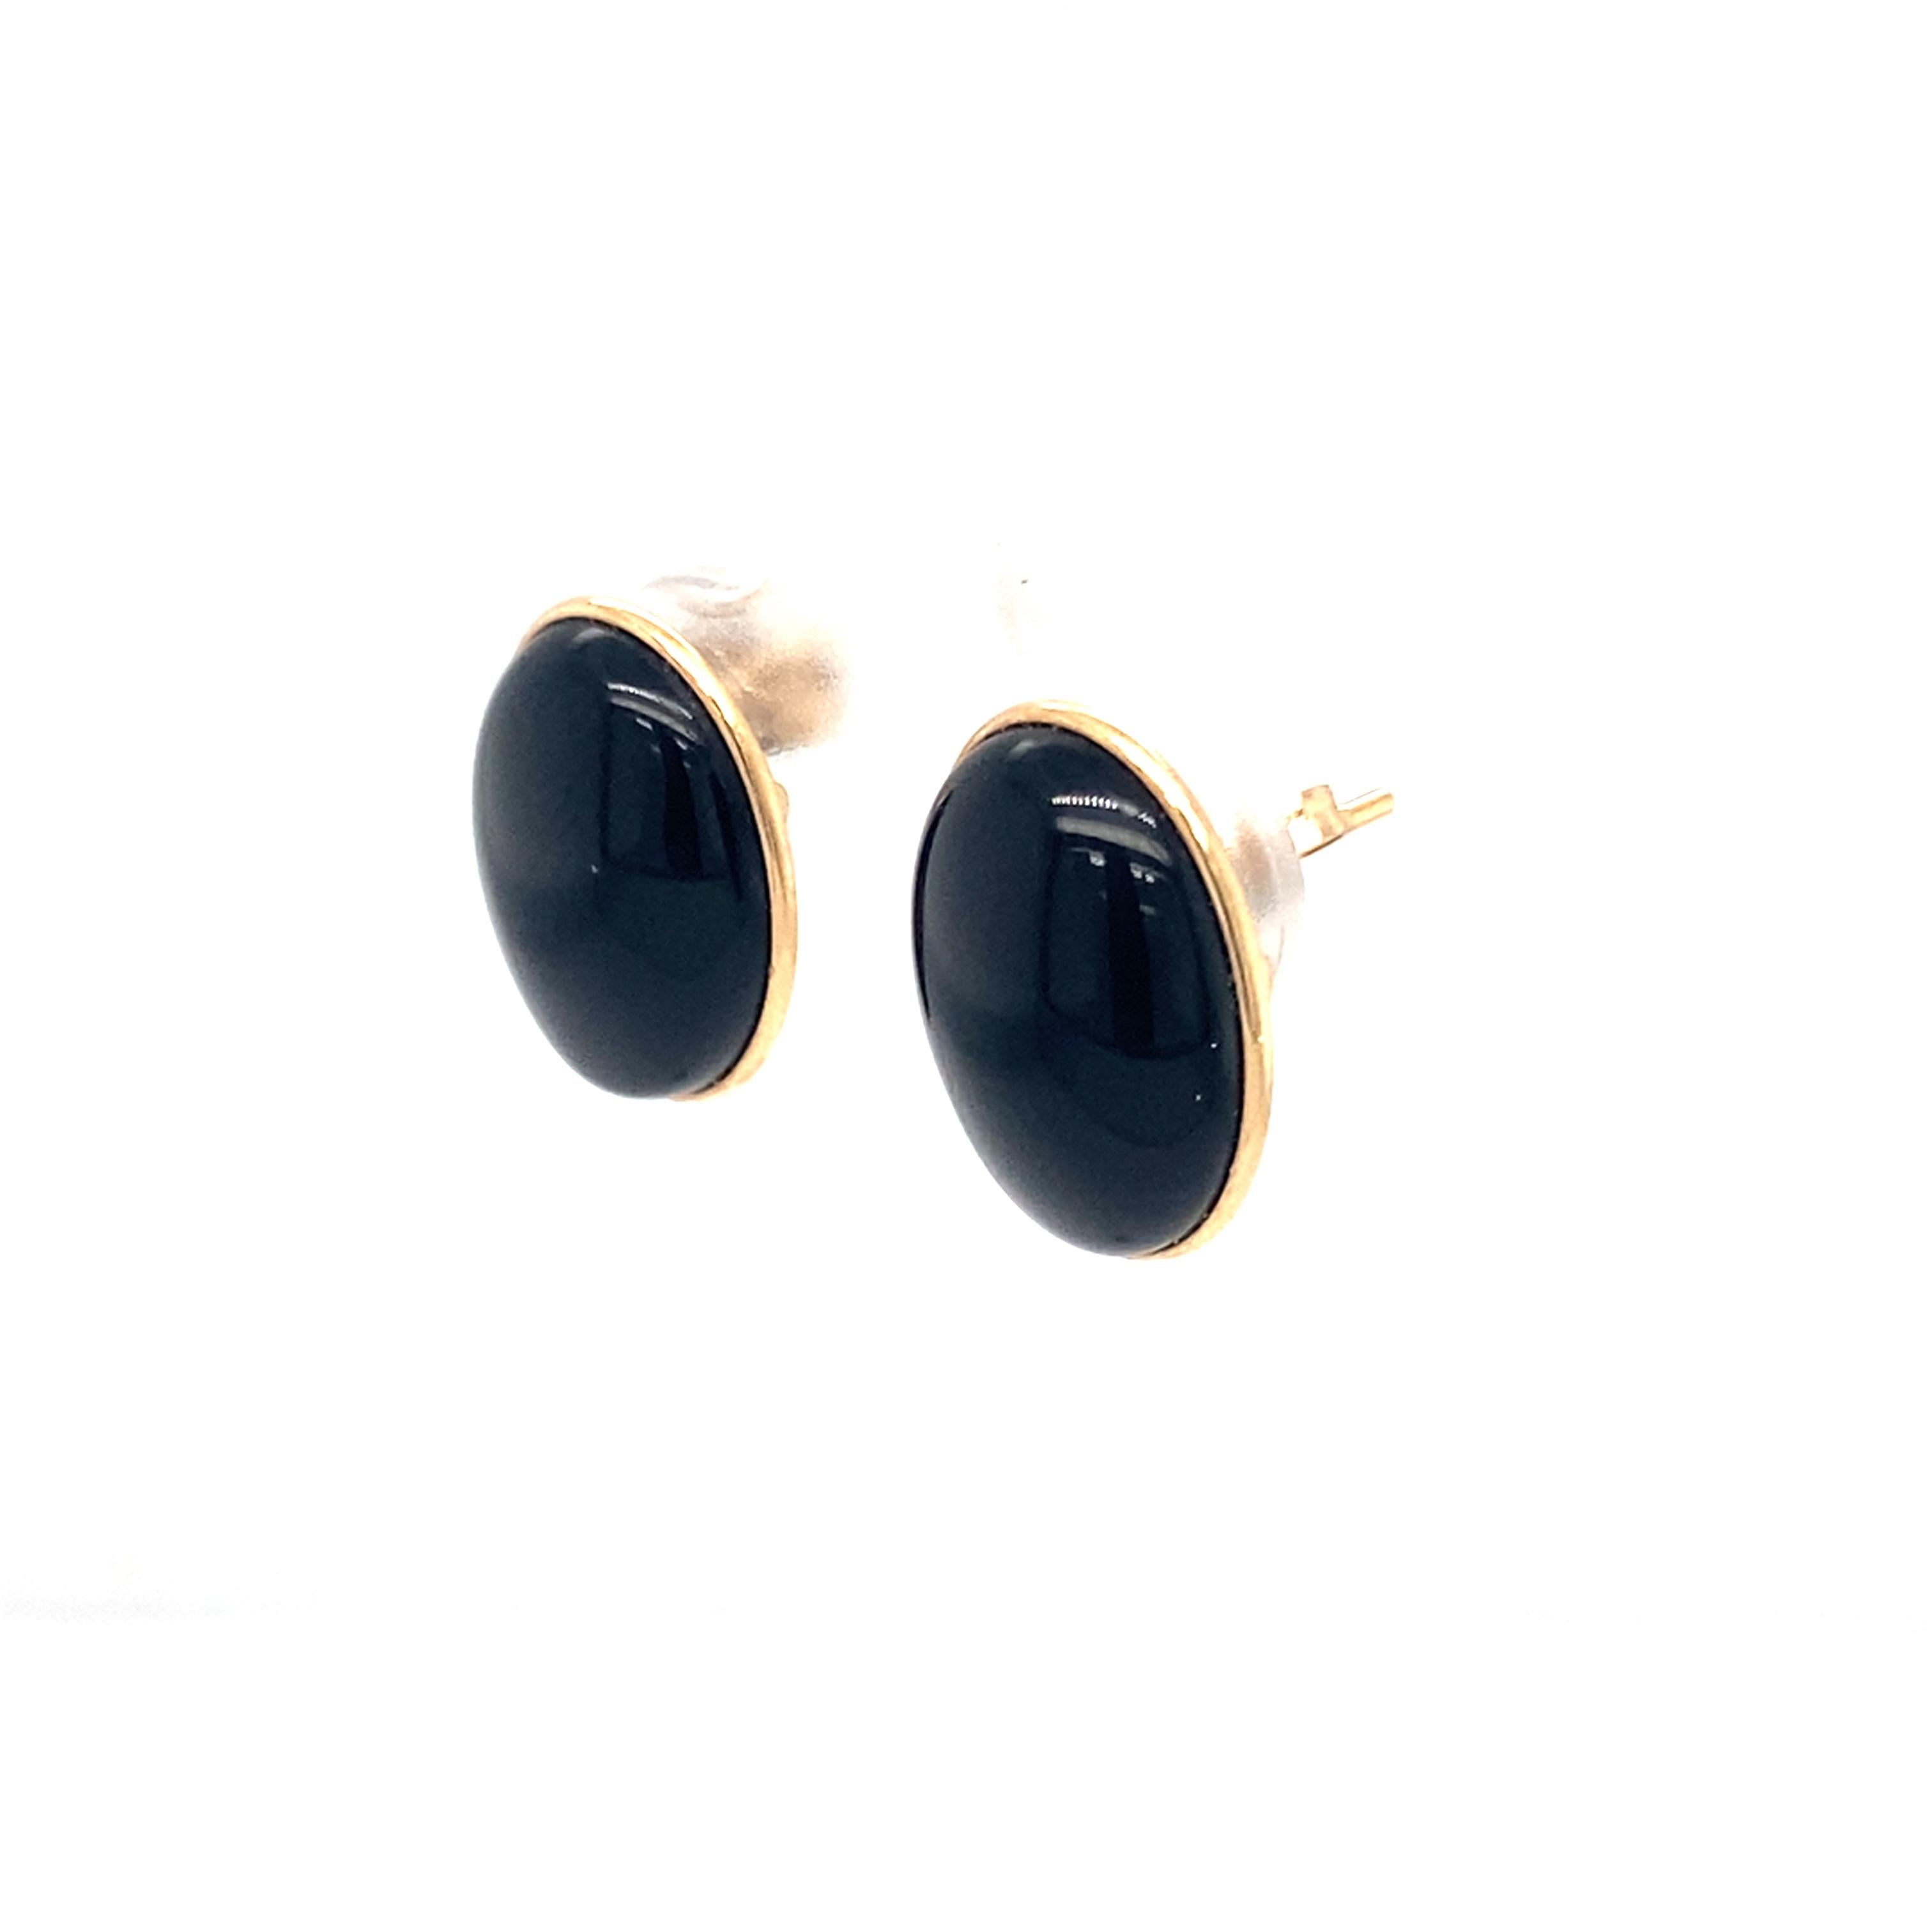 Item Details:
Gemstone: Onyx
Metal: 14 Karat Yellow Gold
Weight: 2.4 grams
Hallmark: 14K
Dimensions: 15 millimeters x 11 millimeters

Onyx Details:
Cut: Cabochon Oval
Color: Black

Item Features:
These beautiful Black oval Onyx stud Earrings are